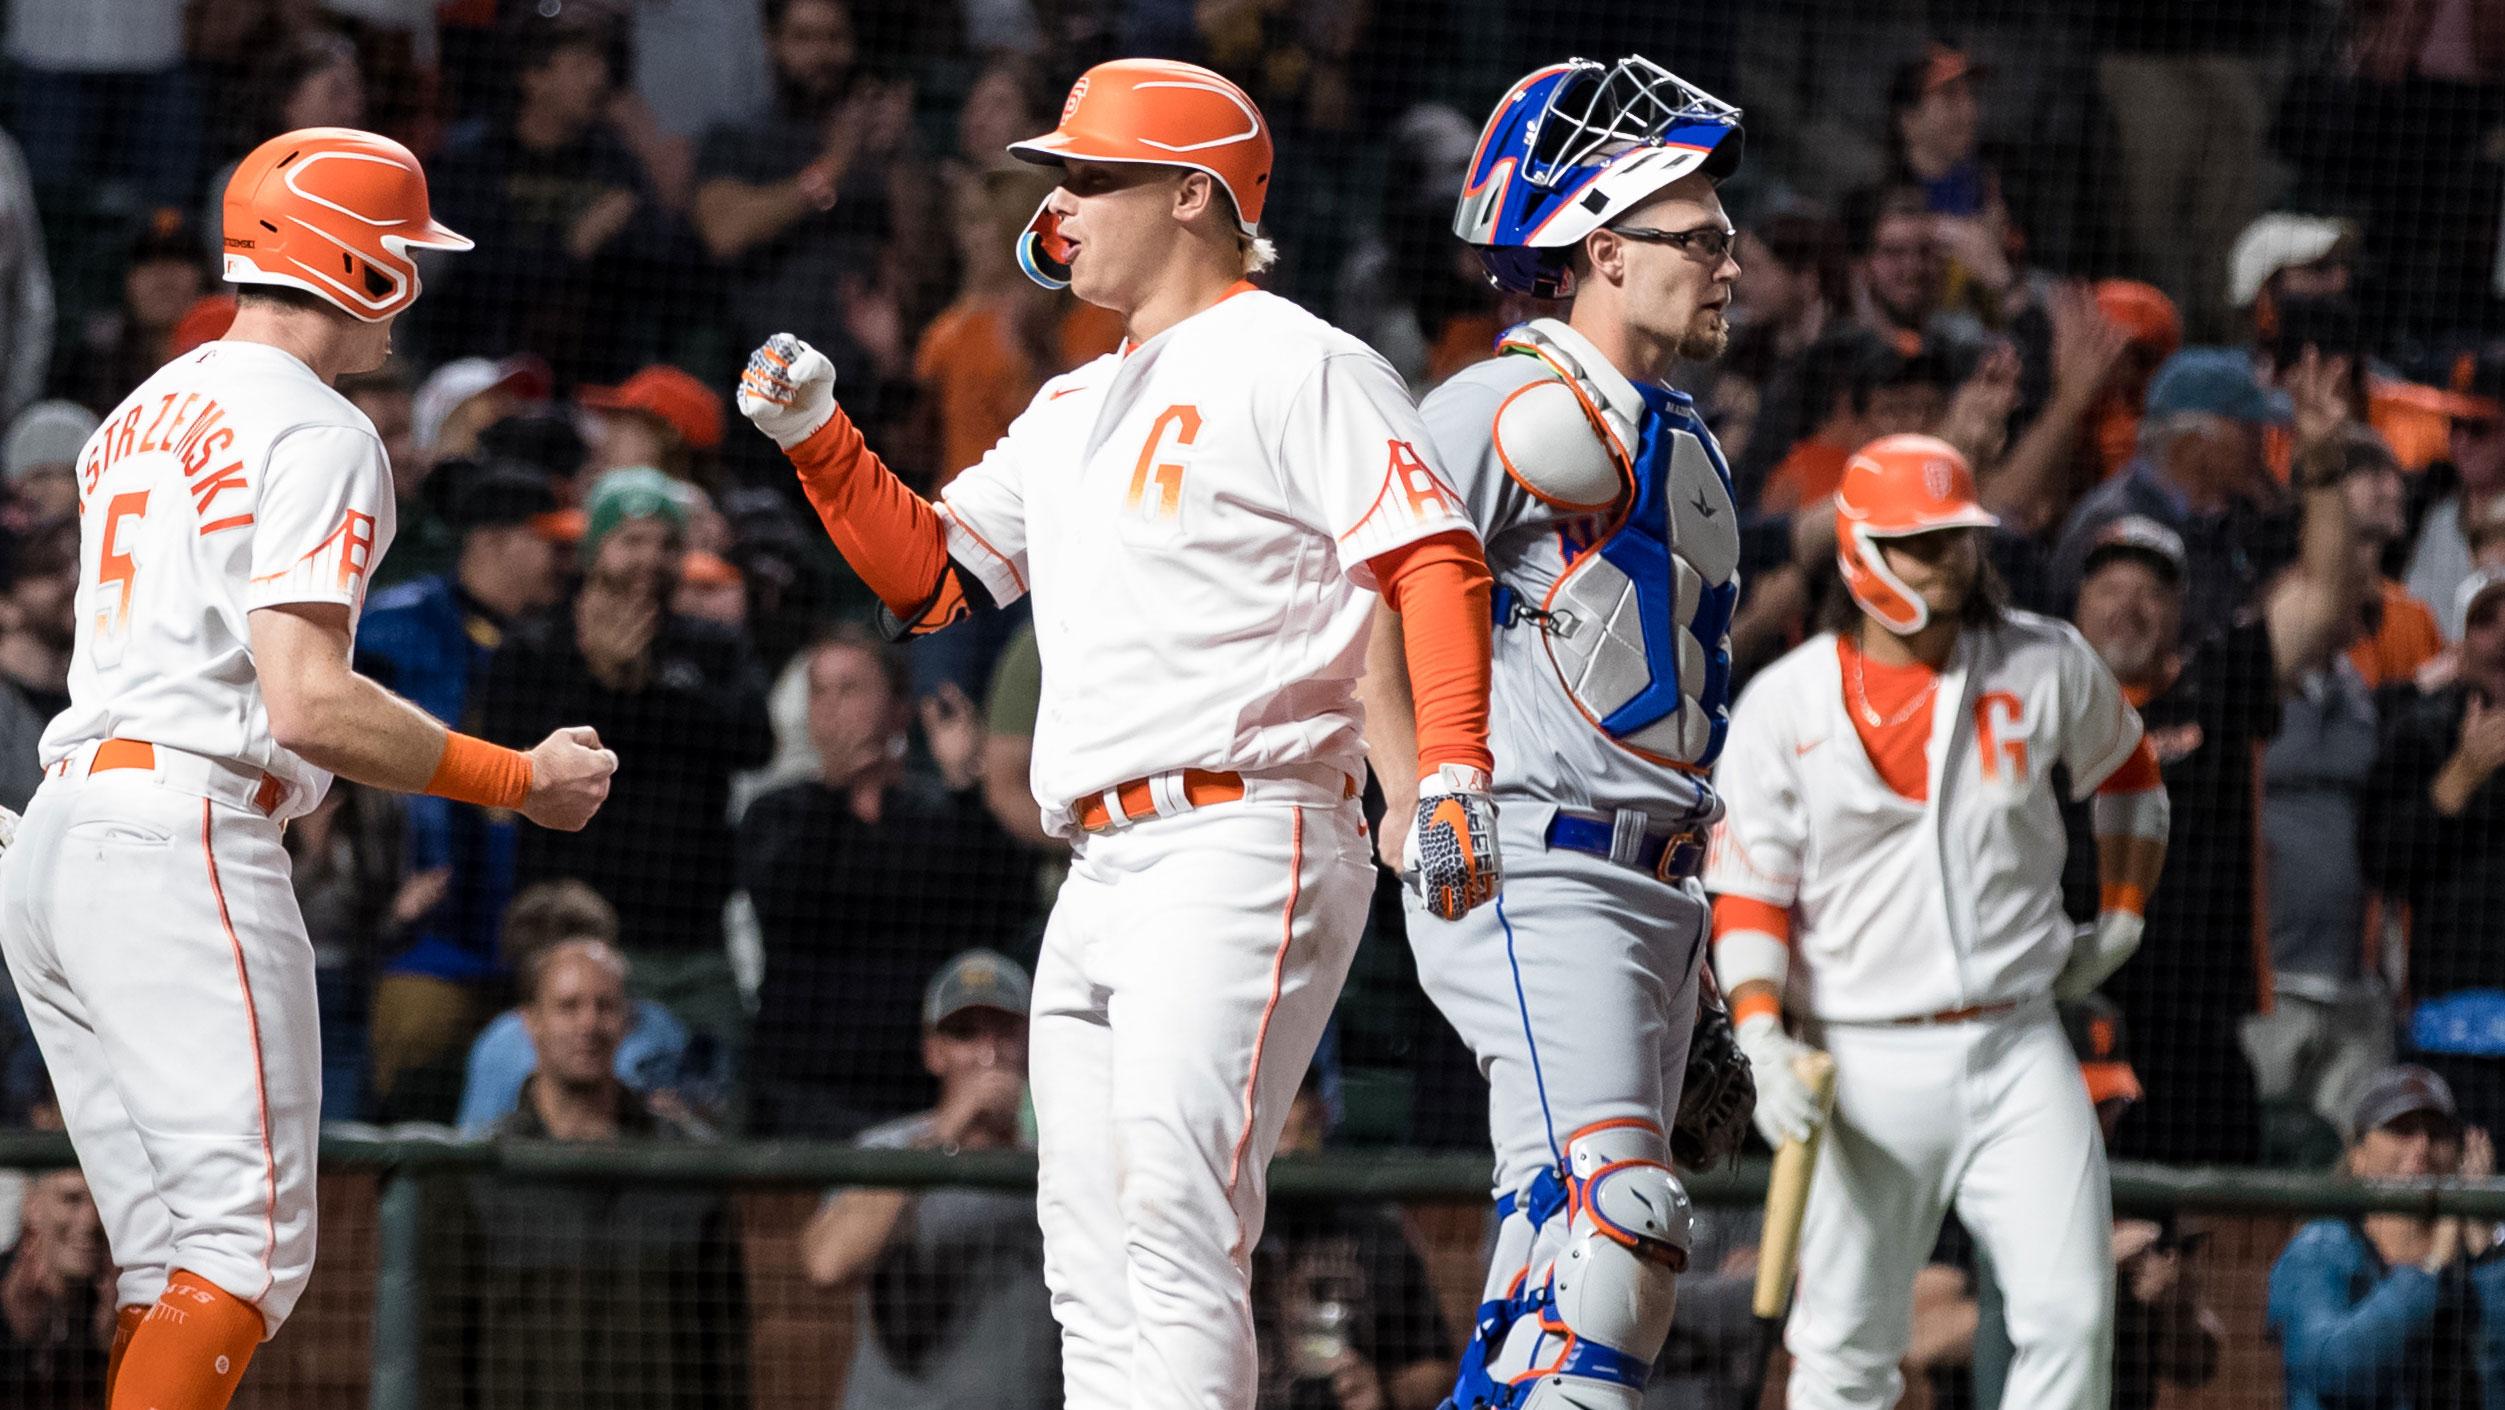 May 24, 2022; San Francisco, California, USA; San Francisco Giants left fielder Joc Pederson (23) celebrates with center fielder Mike Yastrzemski (5) and first baseman Darin Ruf (33) after hitting a three-run home run against the New York Mets during the eighth inning at Oracle Park. / John Hefti-USA TODAY Sports